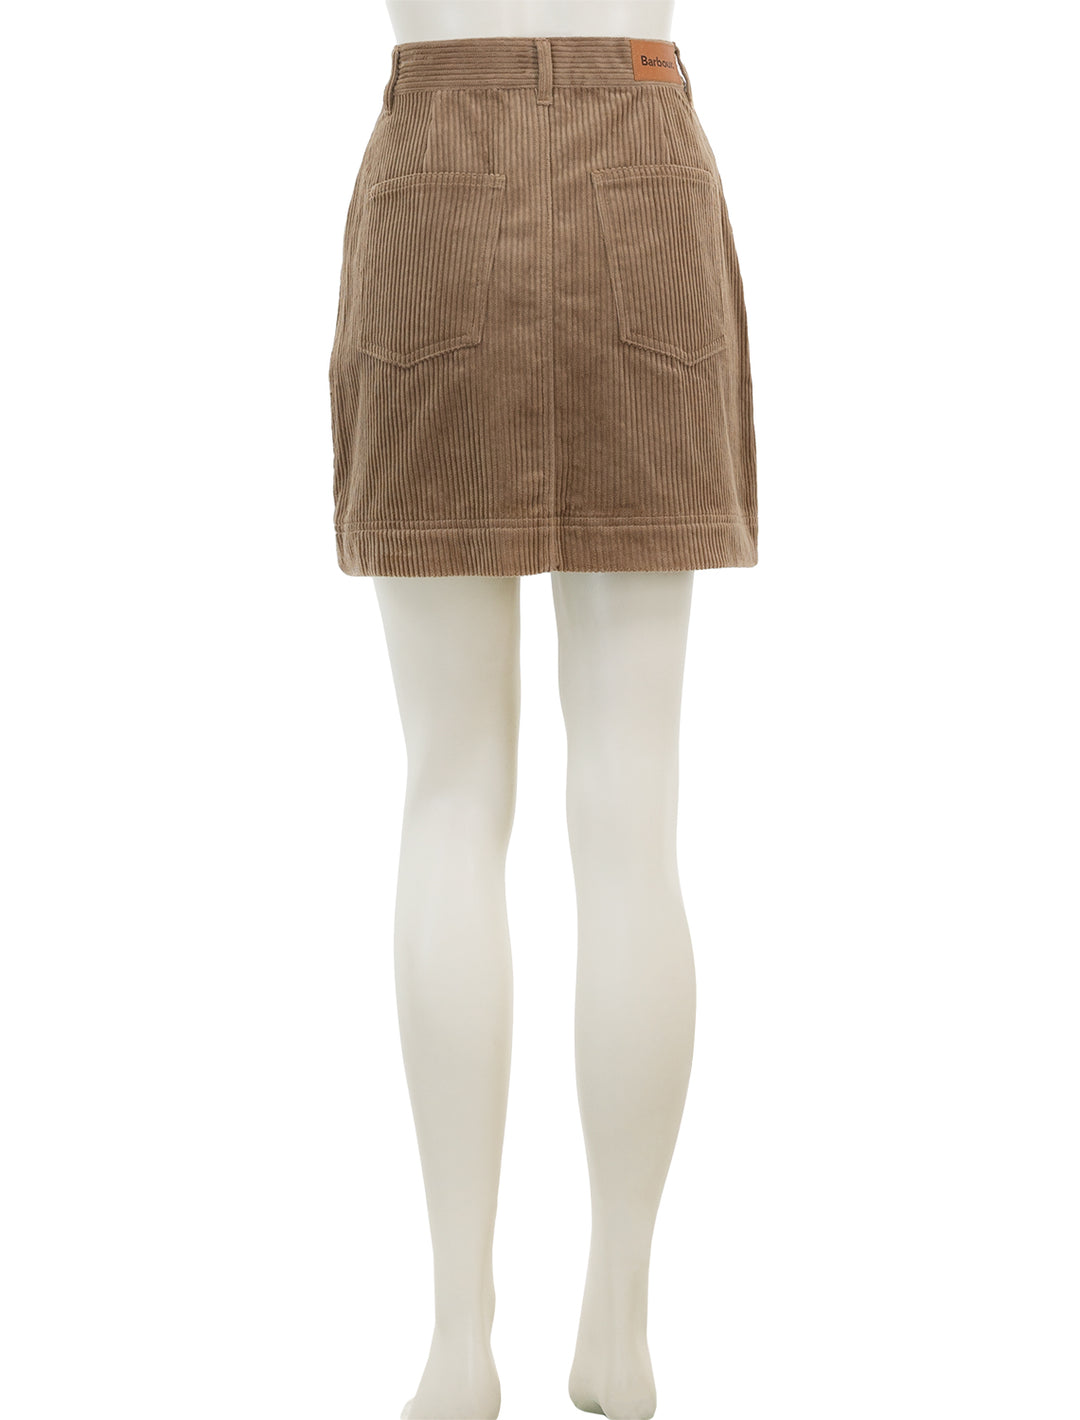 Back view of Barbour's oakfield skirt in taupe corduroy.